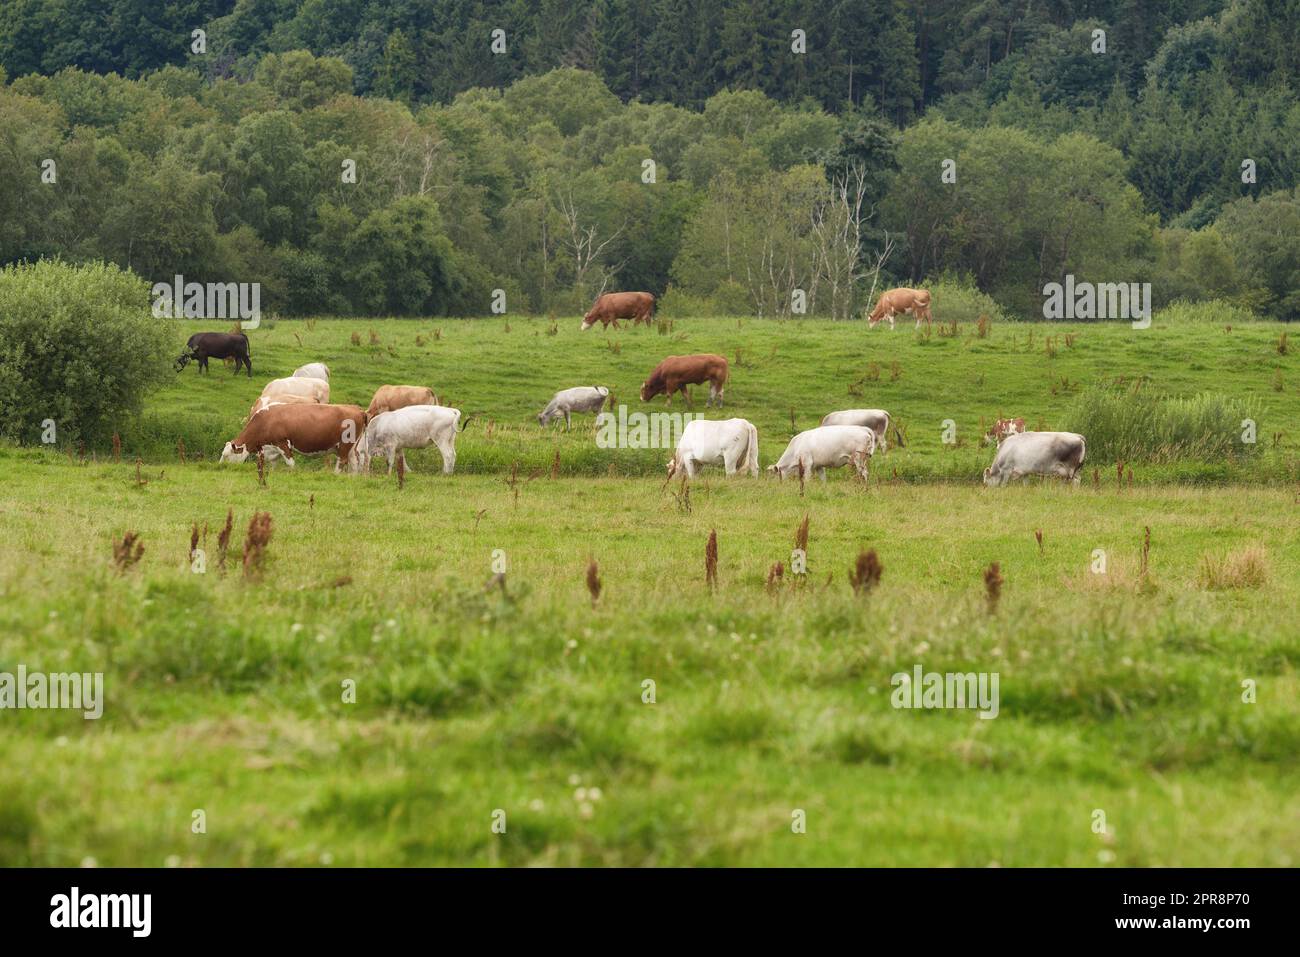 A cattle farm with cows grazing on green pasture on a summer morning. Livestock or a herd feeding outdoors in a meadow during spring. Brown and white cow stock on a field eating Stock Photo